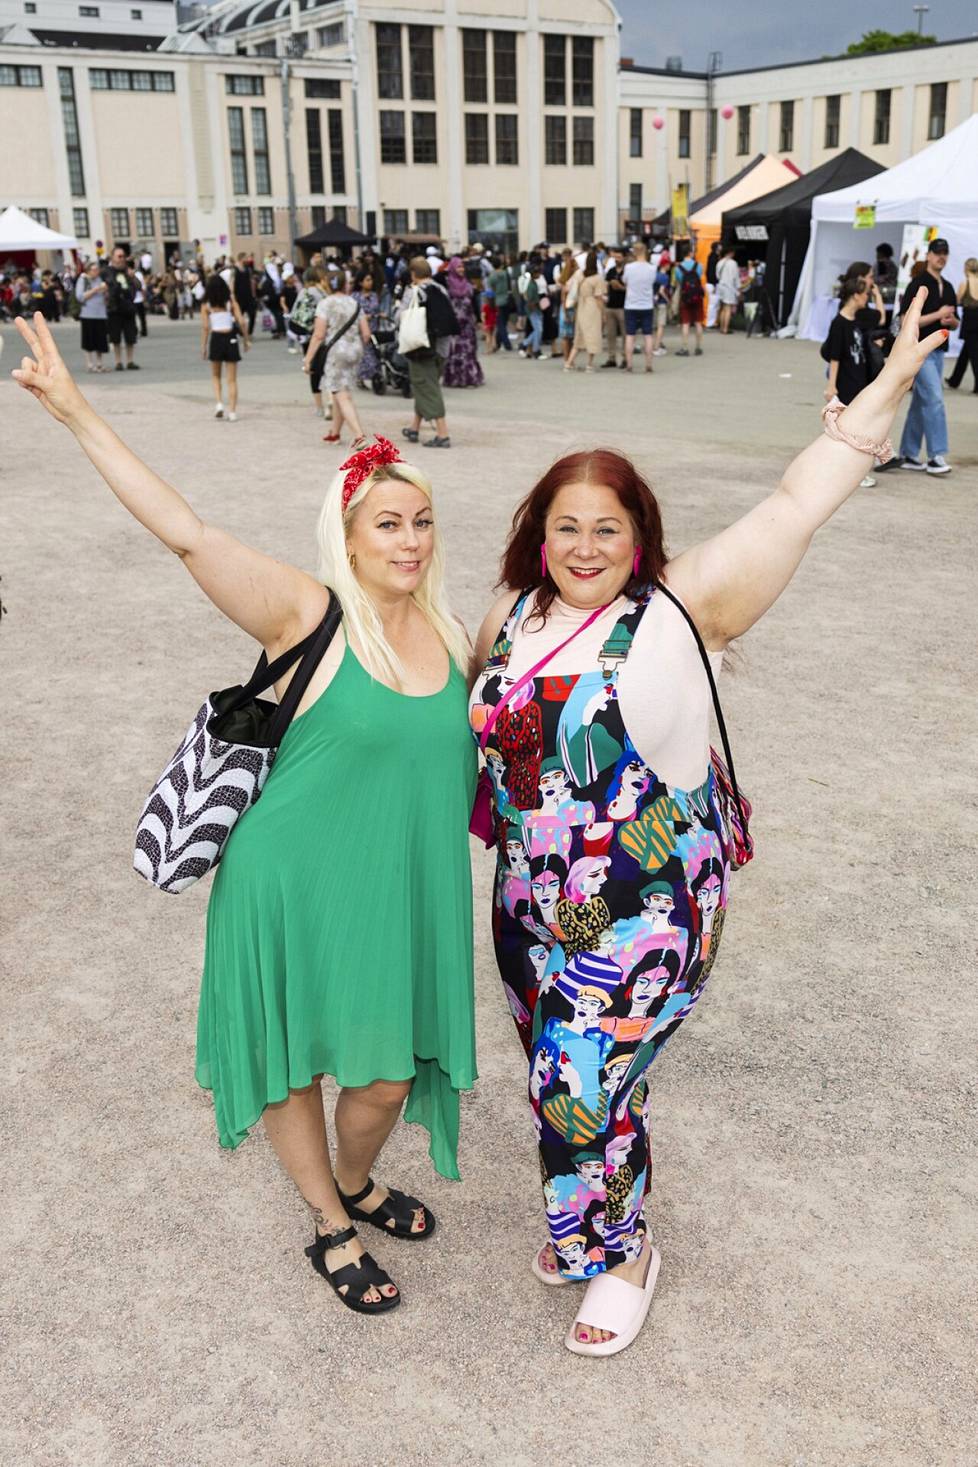 Espoo's Heidi Serpa (left) has a green dress, which according to her is suitable for the summer weather, and in summer there must be color.  According to her, Anna Luoto's jumpsuit from Helsinki has a humanity theme, which is suitable for the festival.